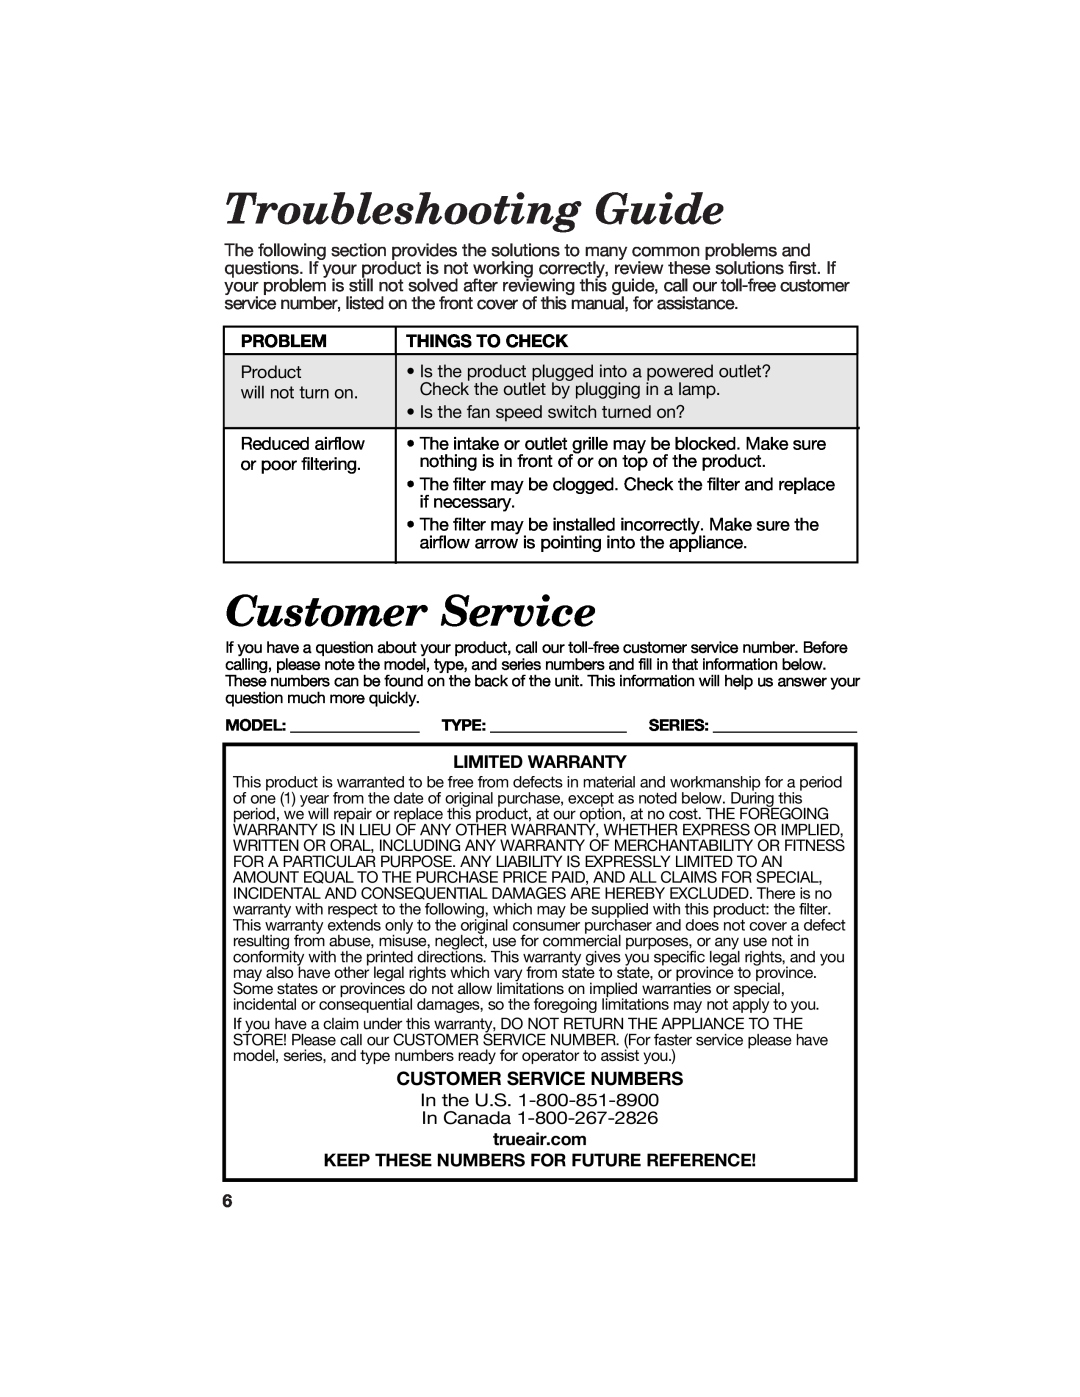 Hamilton Beach 840133100 manual Troubleshooting Guide, Customer Service, Problem, Things To Check, Limited Warranty 